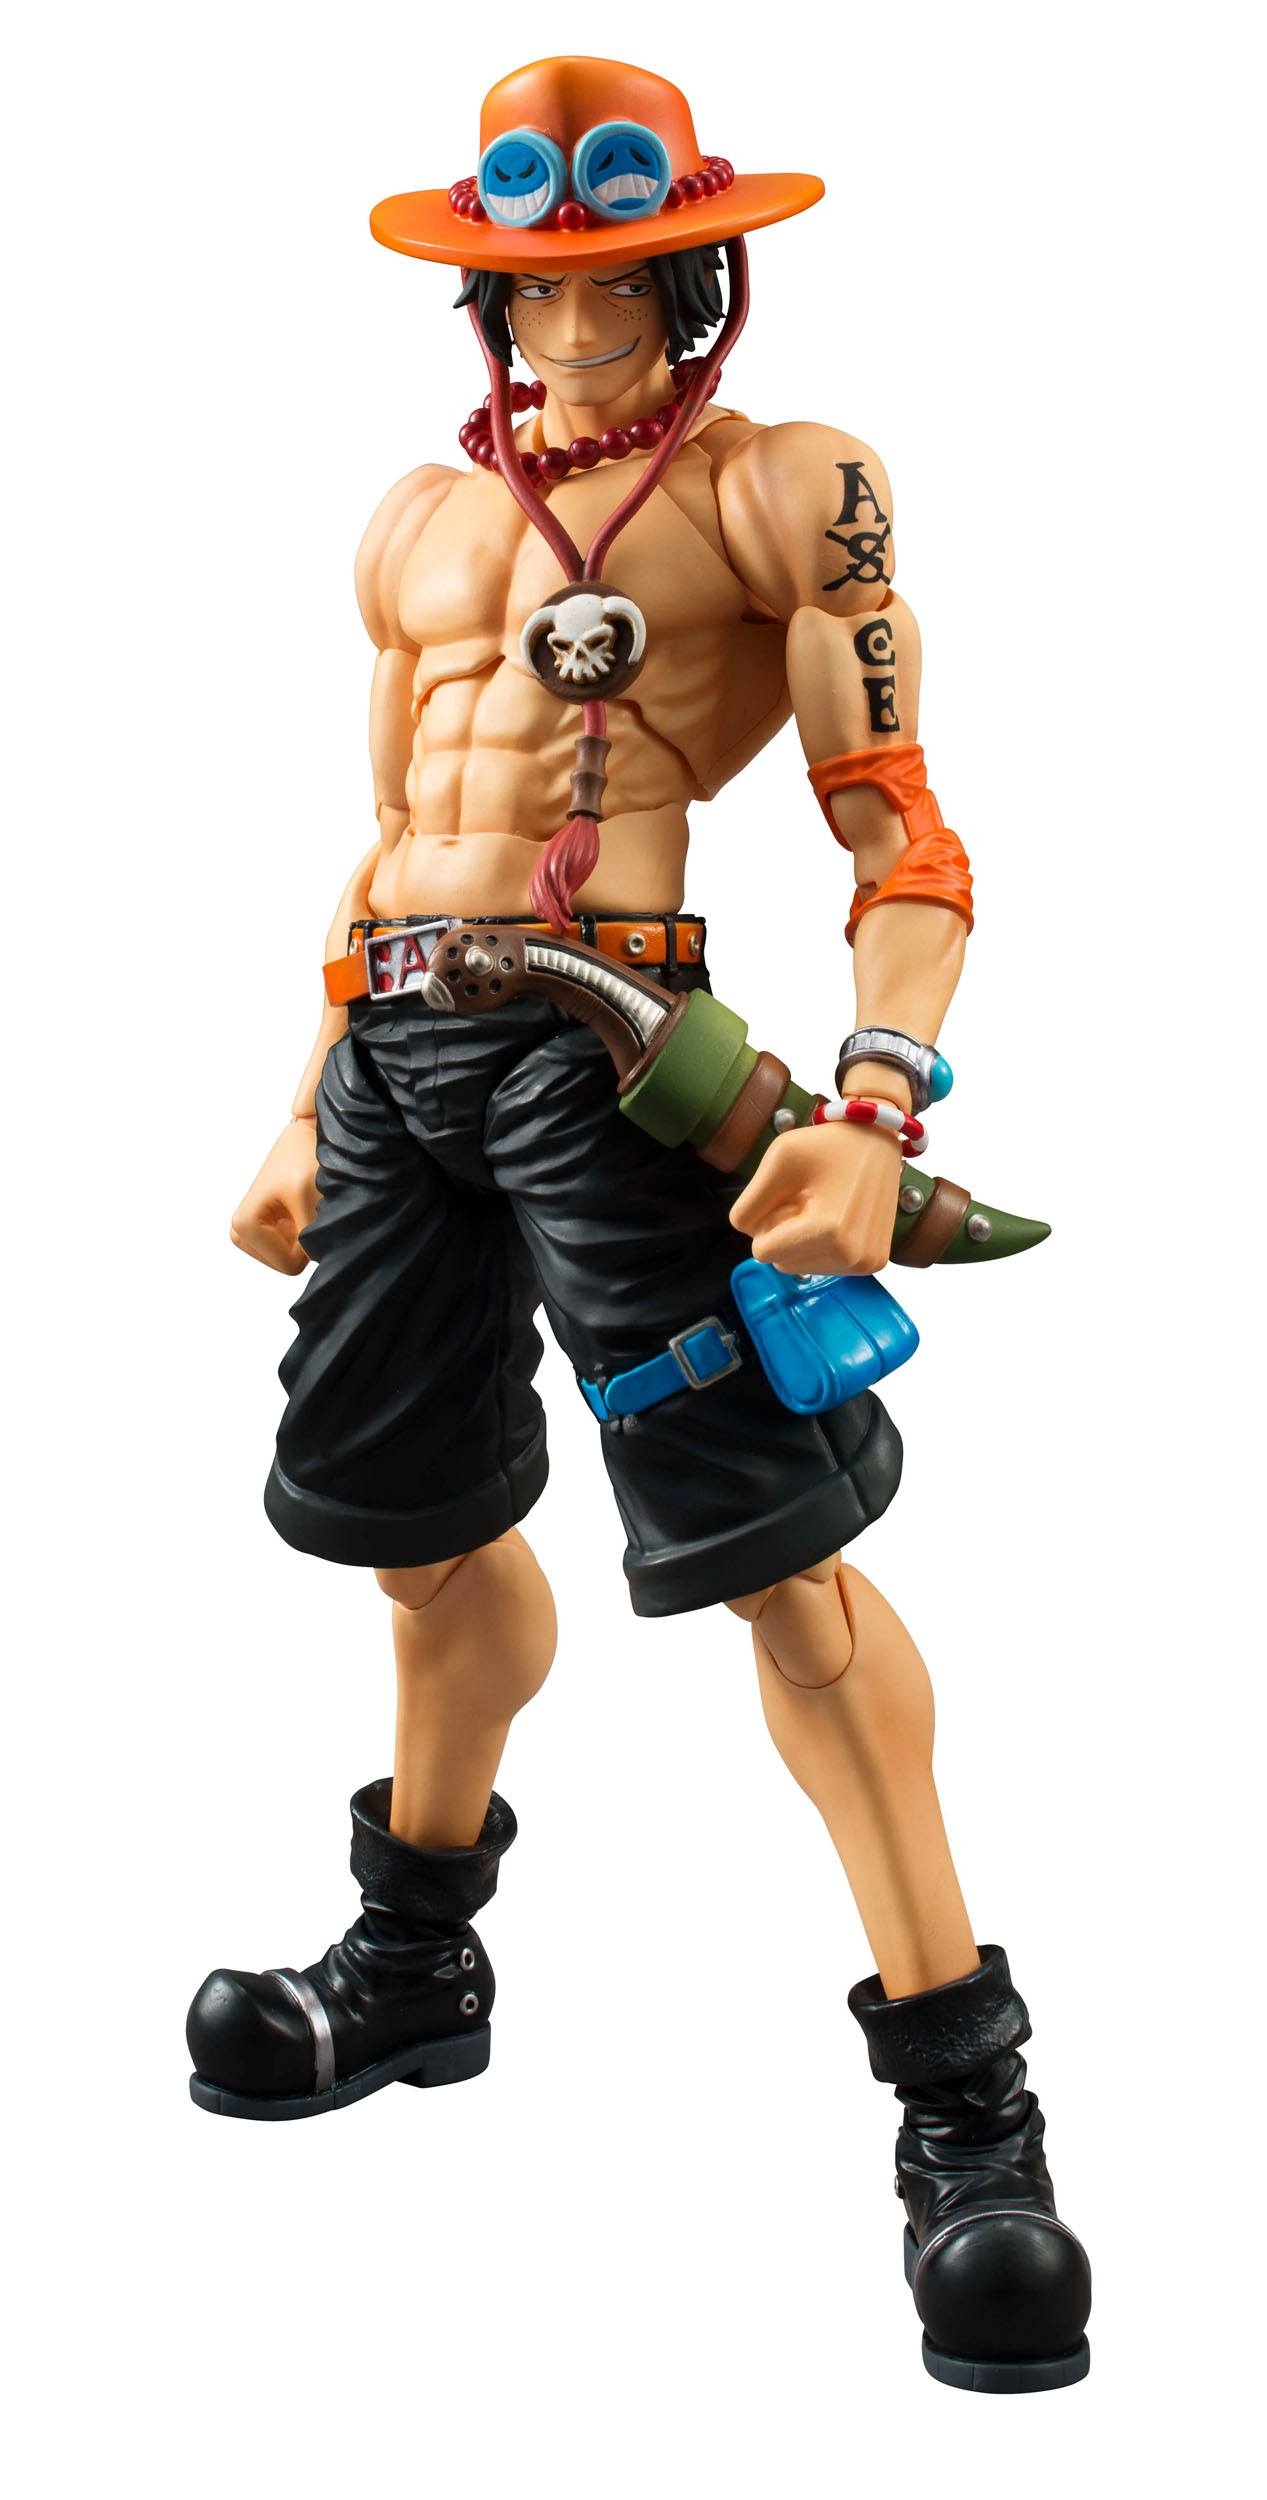 Portgas D Ace Variable Action Heroes, Megahouse